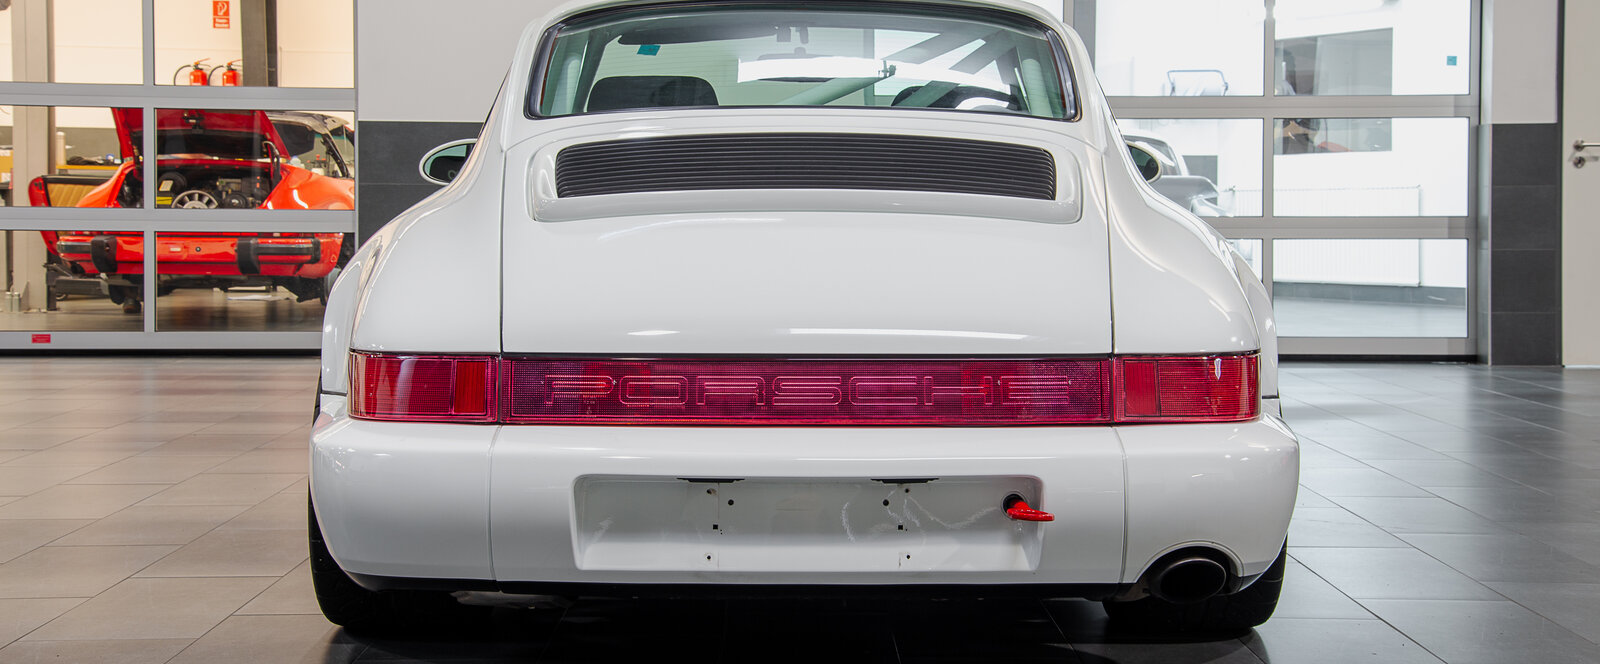 964 CUP